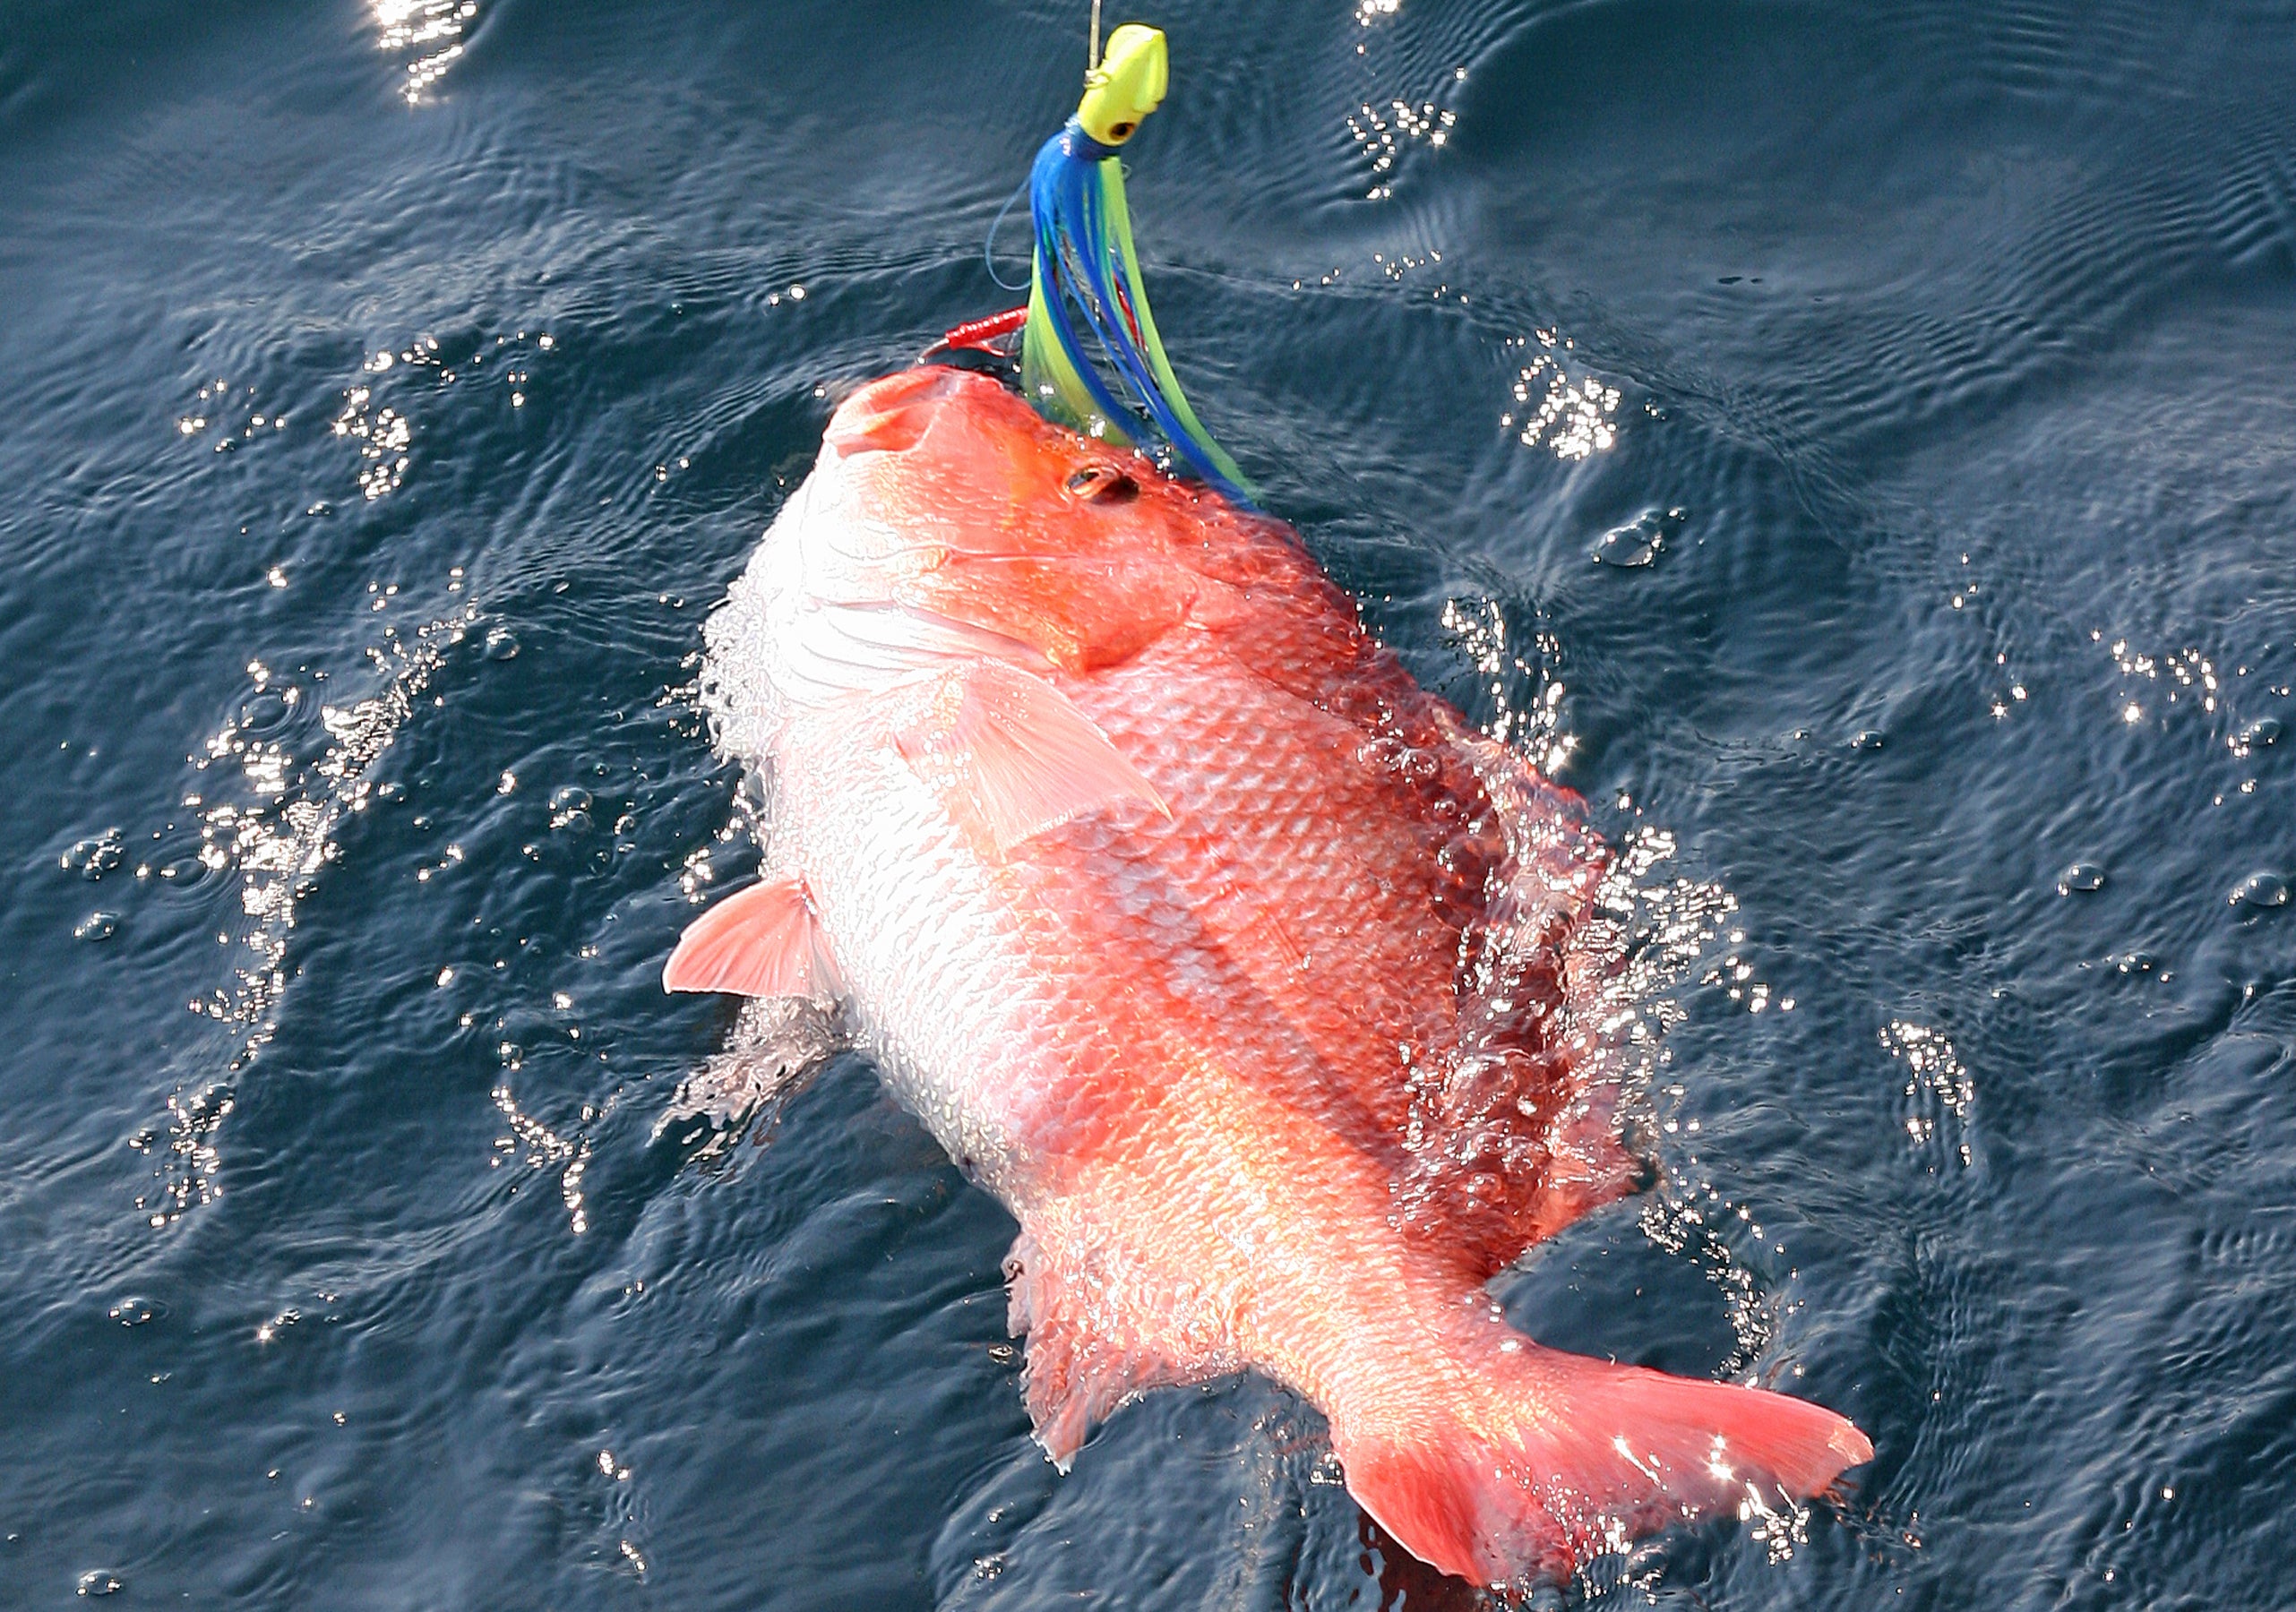 Private Anglers To Get One More Opportunity at Red Snapper